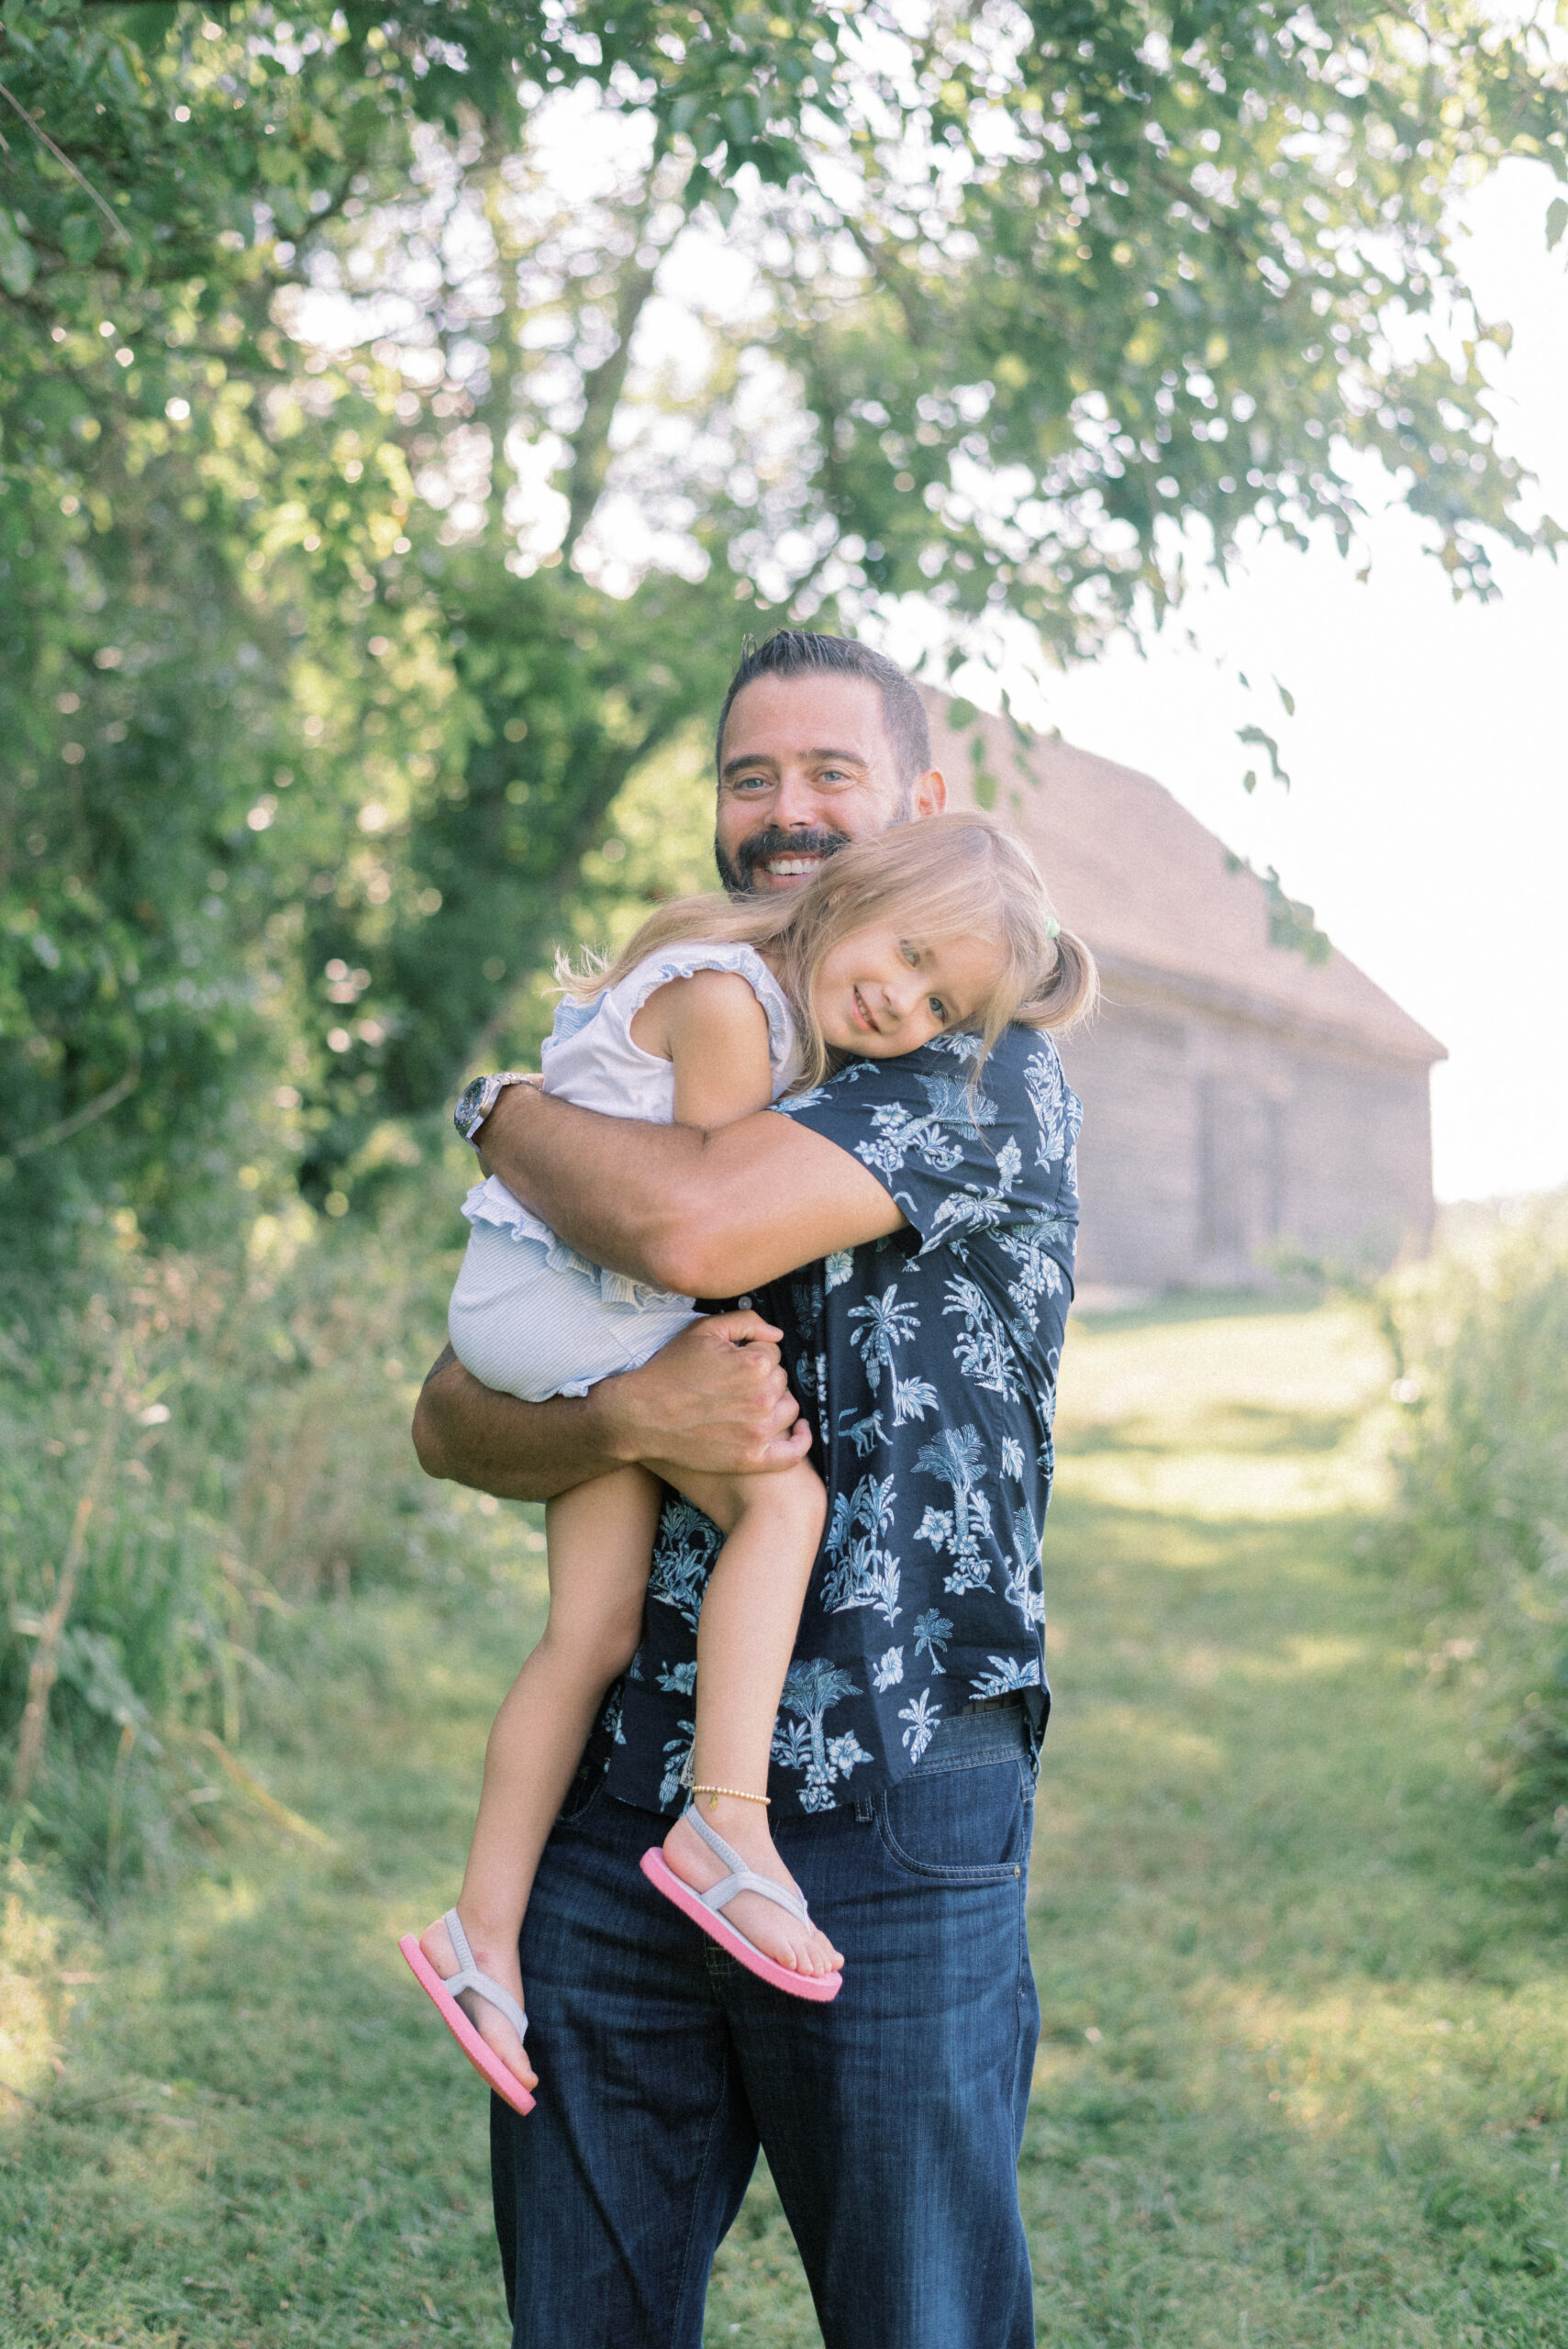 Maryland photographer captures father hugging daughter outside